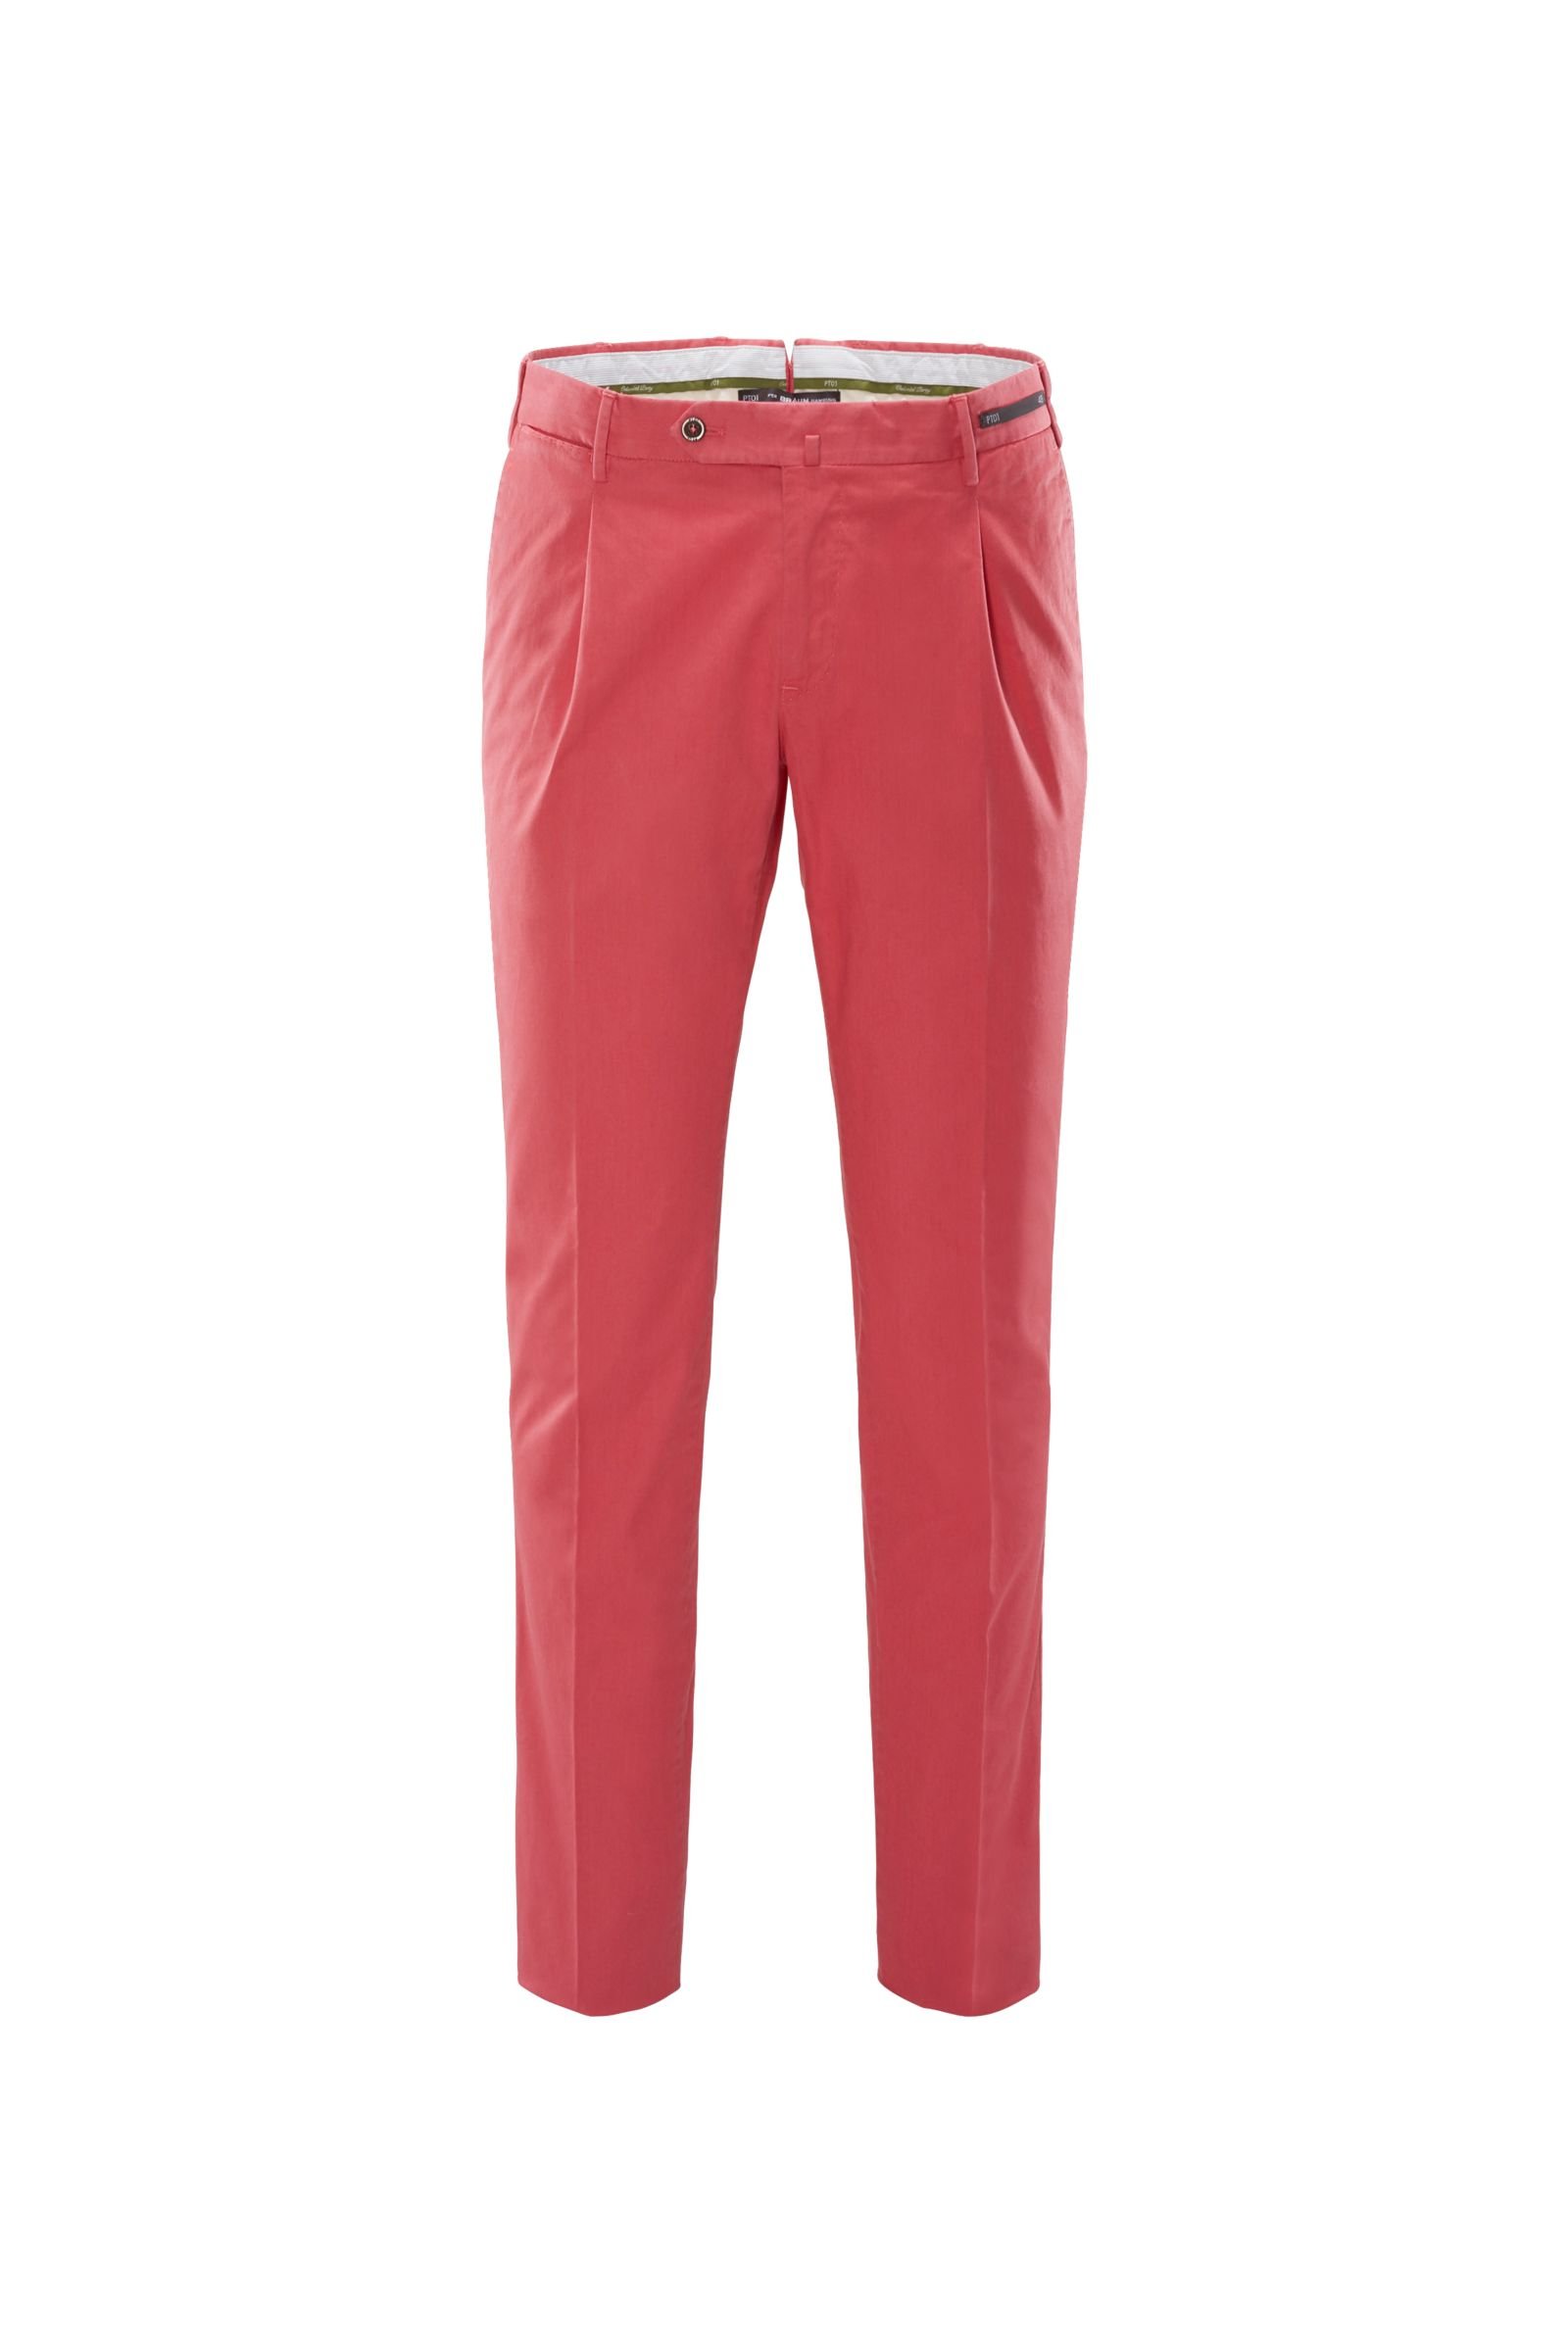 Cotton trousers 'Colonial Party Bombay Hills Super Slim Fit' coral